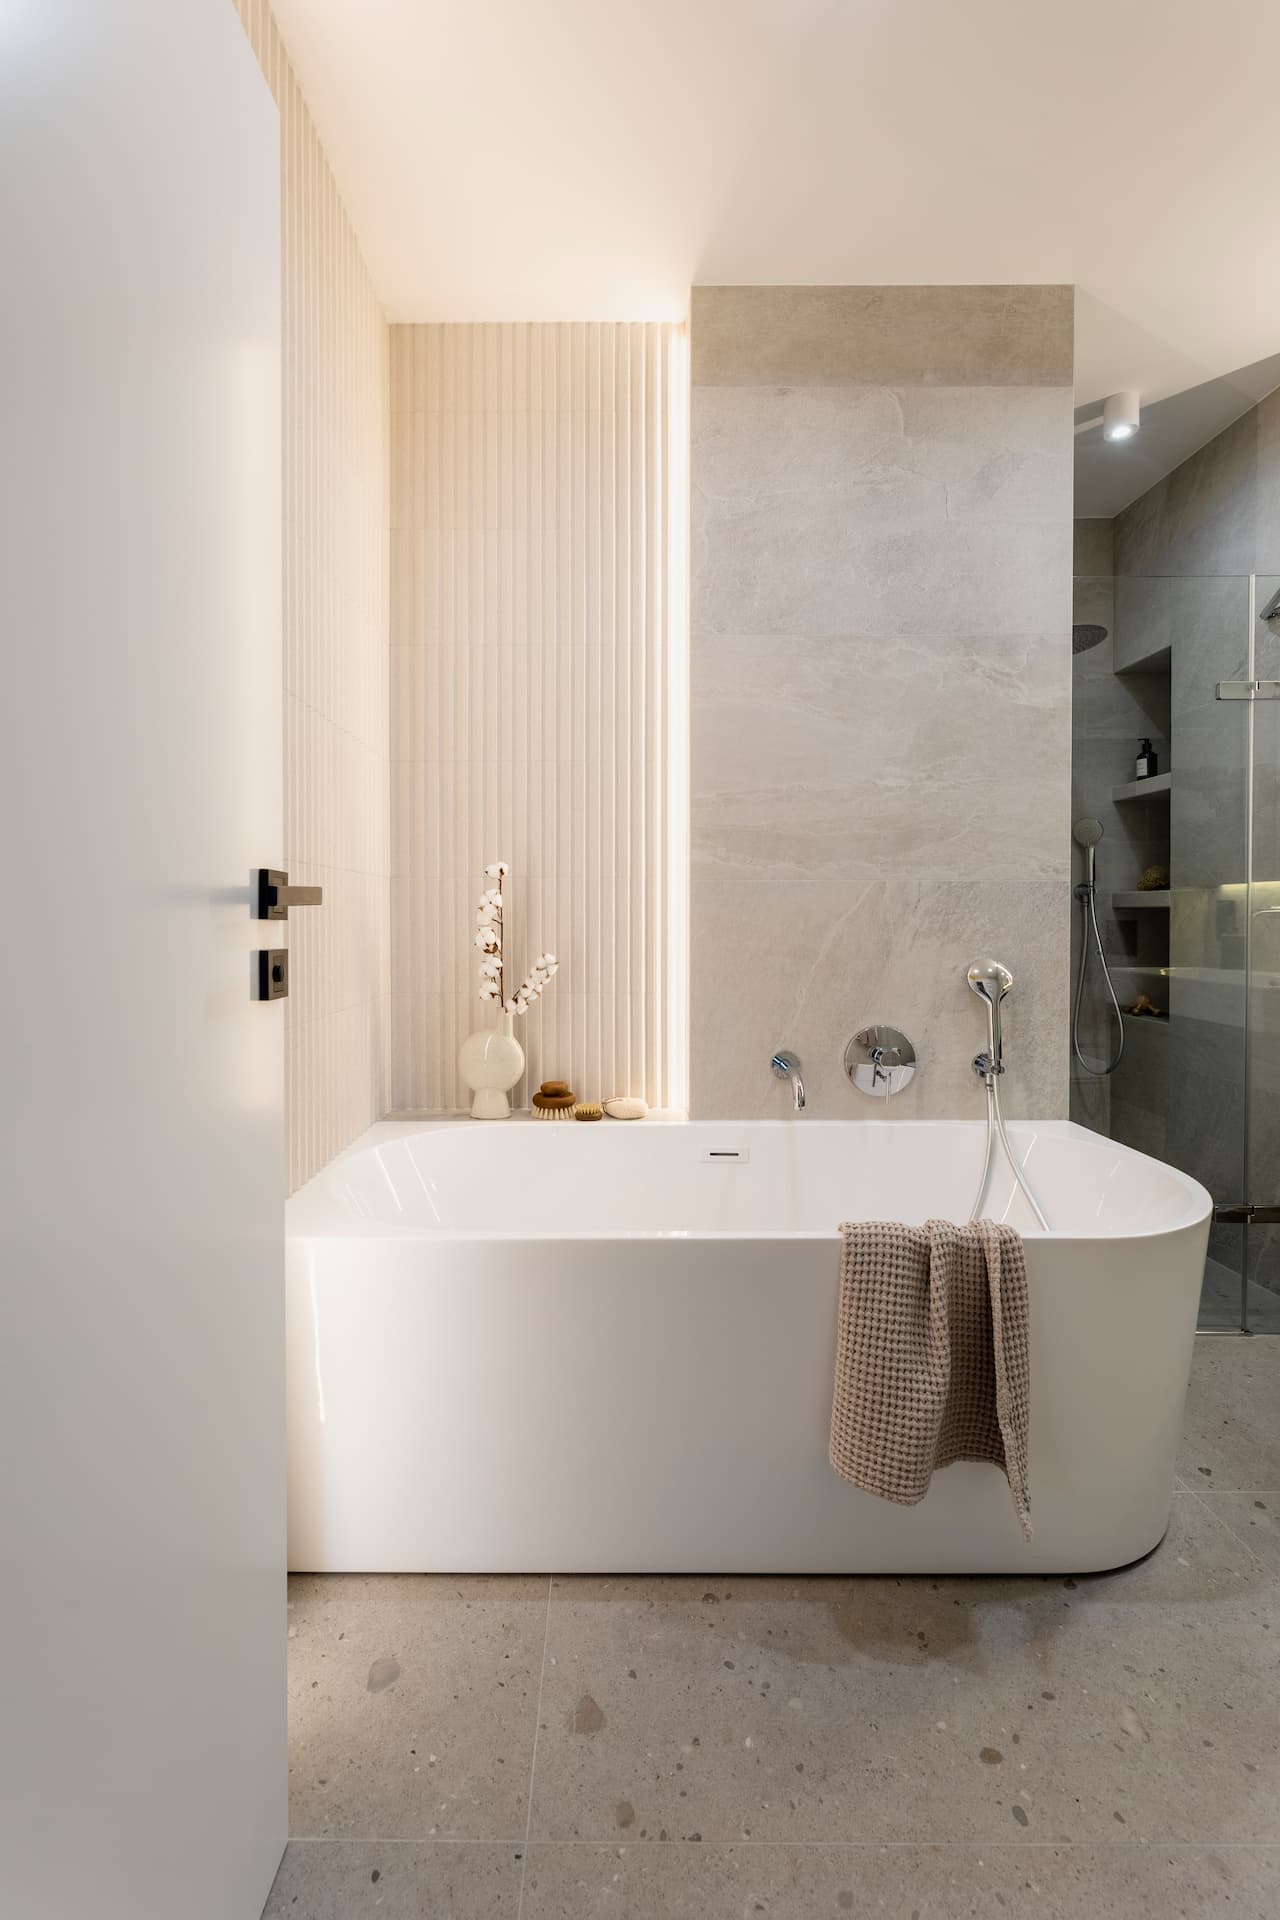 modern-bright-bathroom-with-lamella-wall-big-white-bath-with-silver-faucet-brown-towel (2) (1)